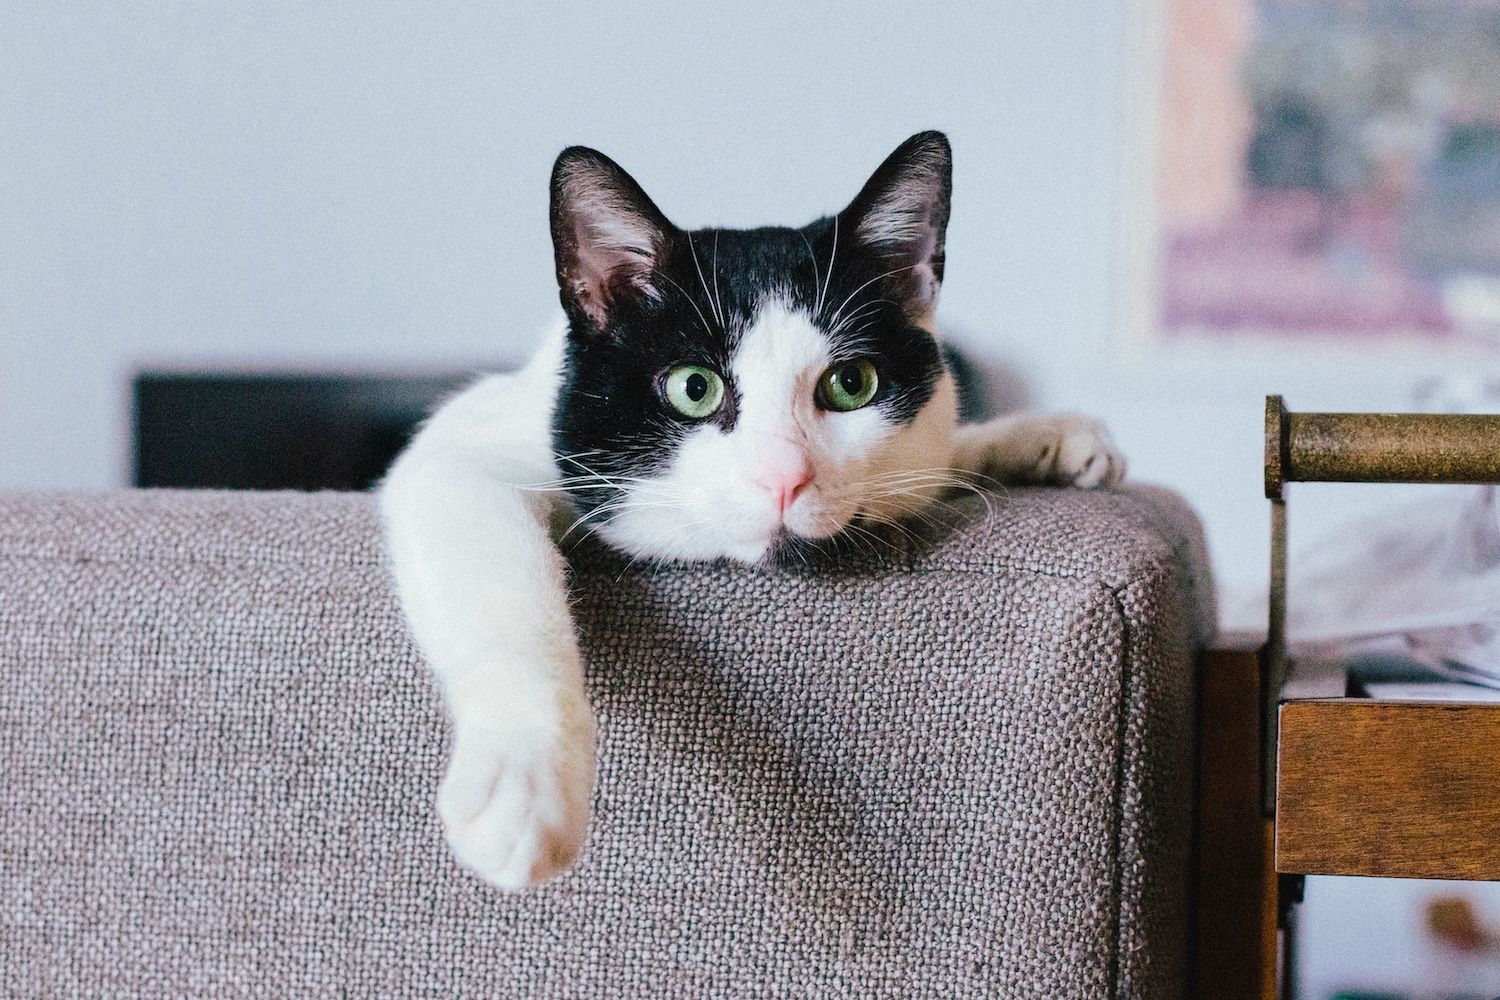 15 things cats teach us about life